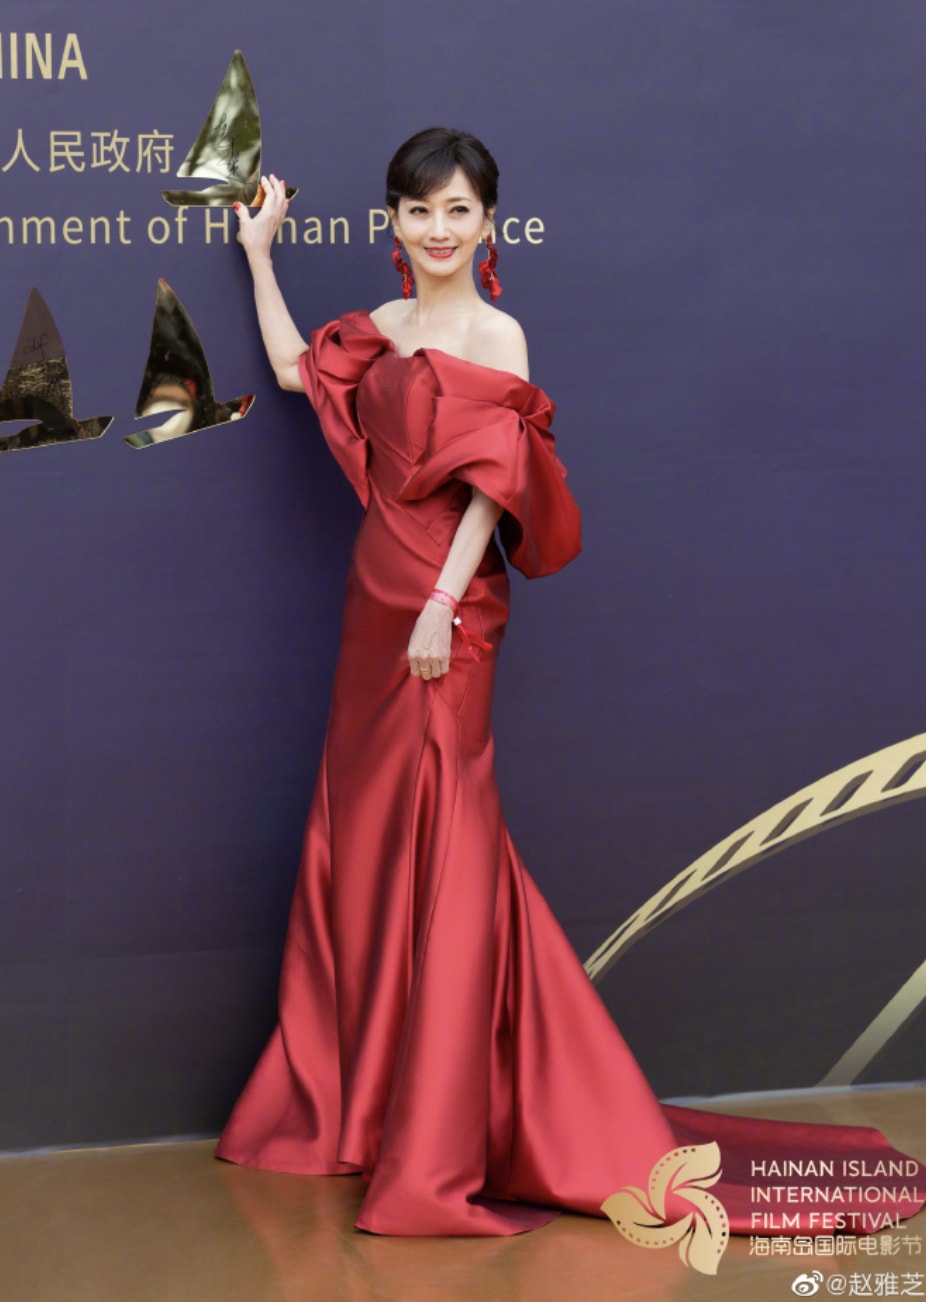 Angie Chiu, 69, Wows Netizens With Her Ageless Beauty In Striking Red ...